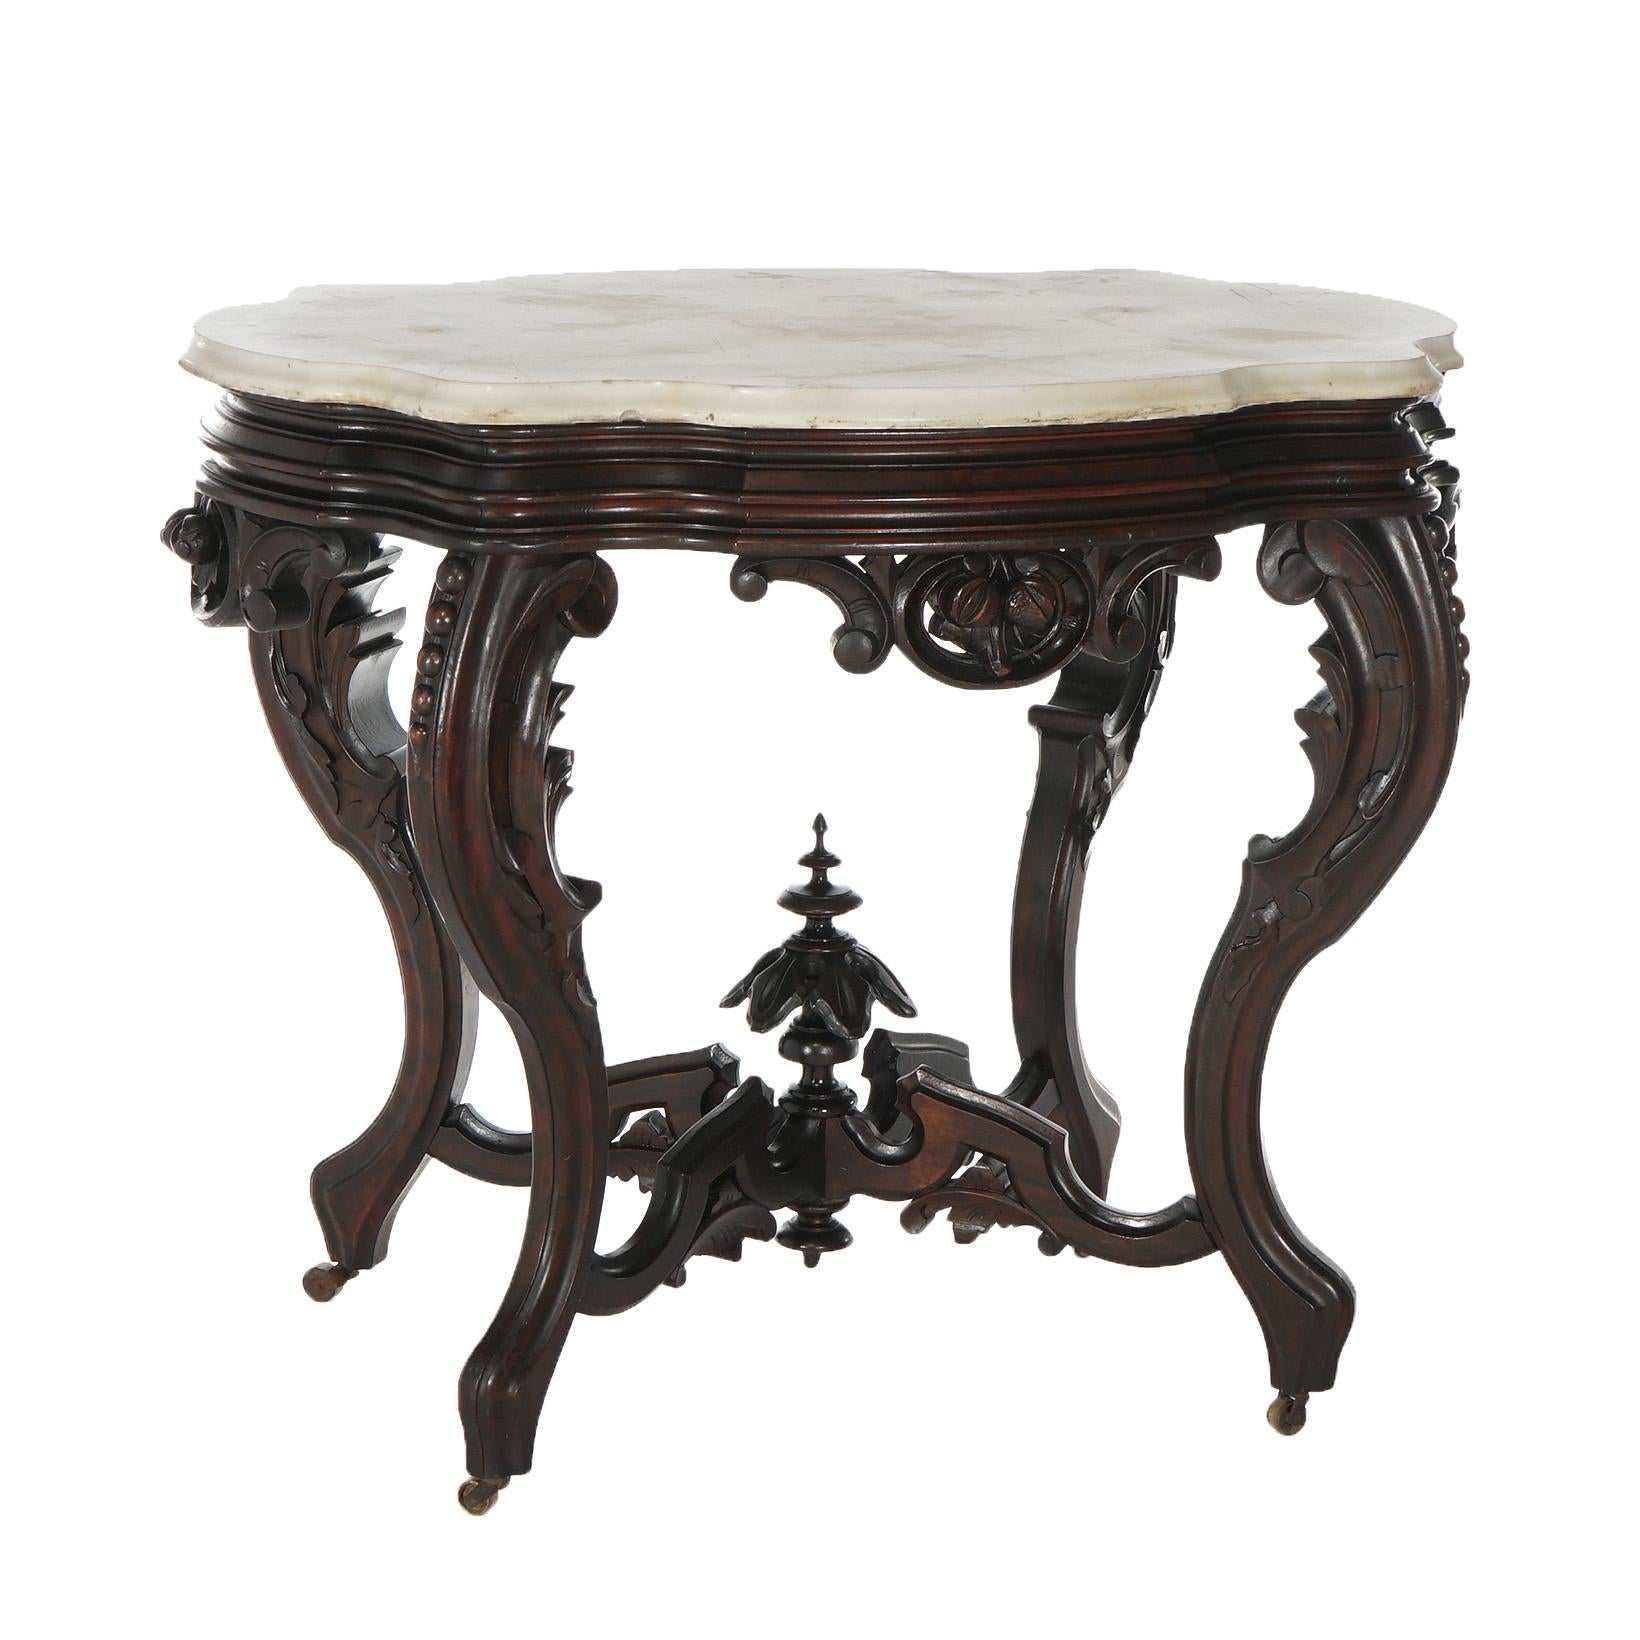 Antique Brooks Victorian Heavily Carved Walnut & Marble Turtle Top Table C1870 For Sale 11